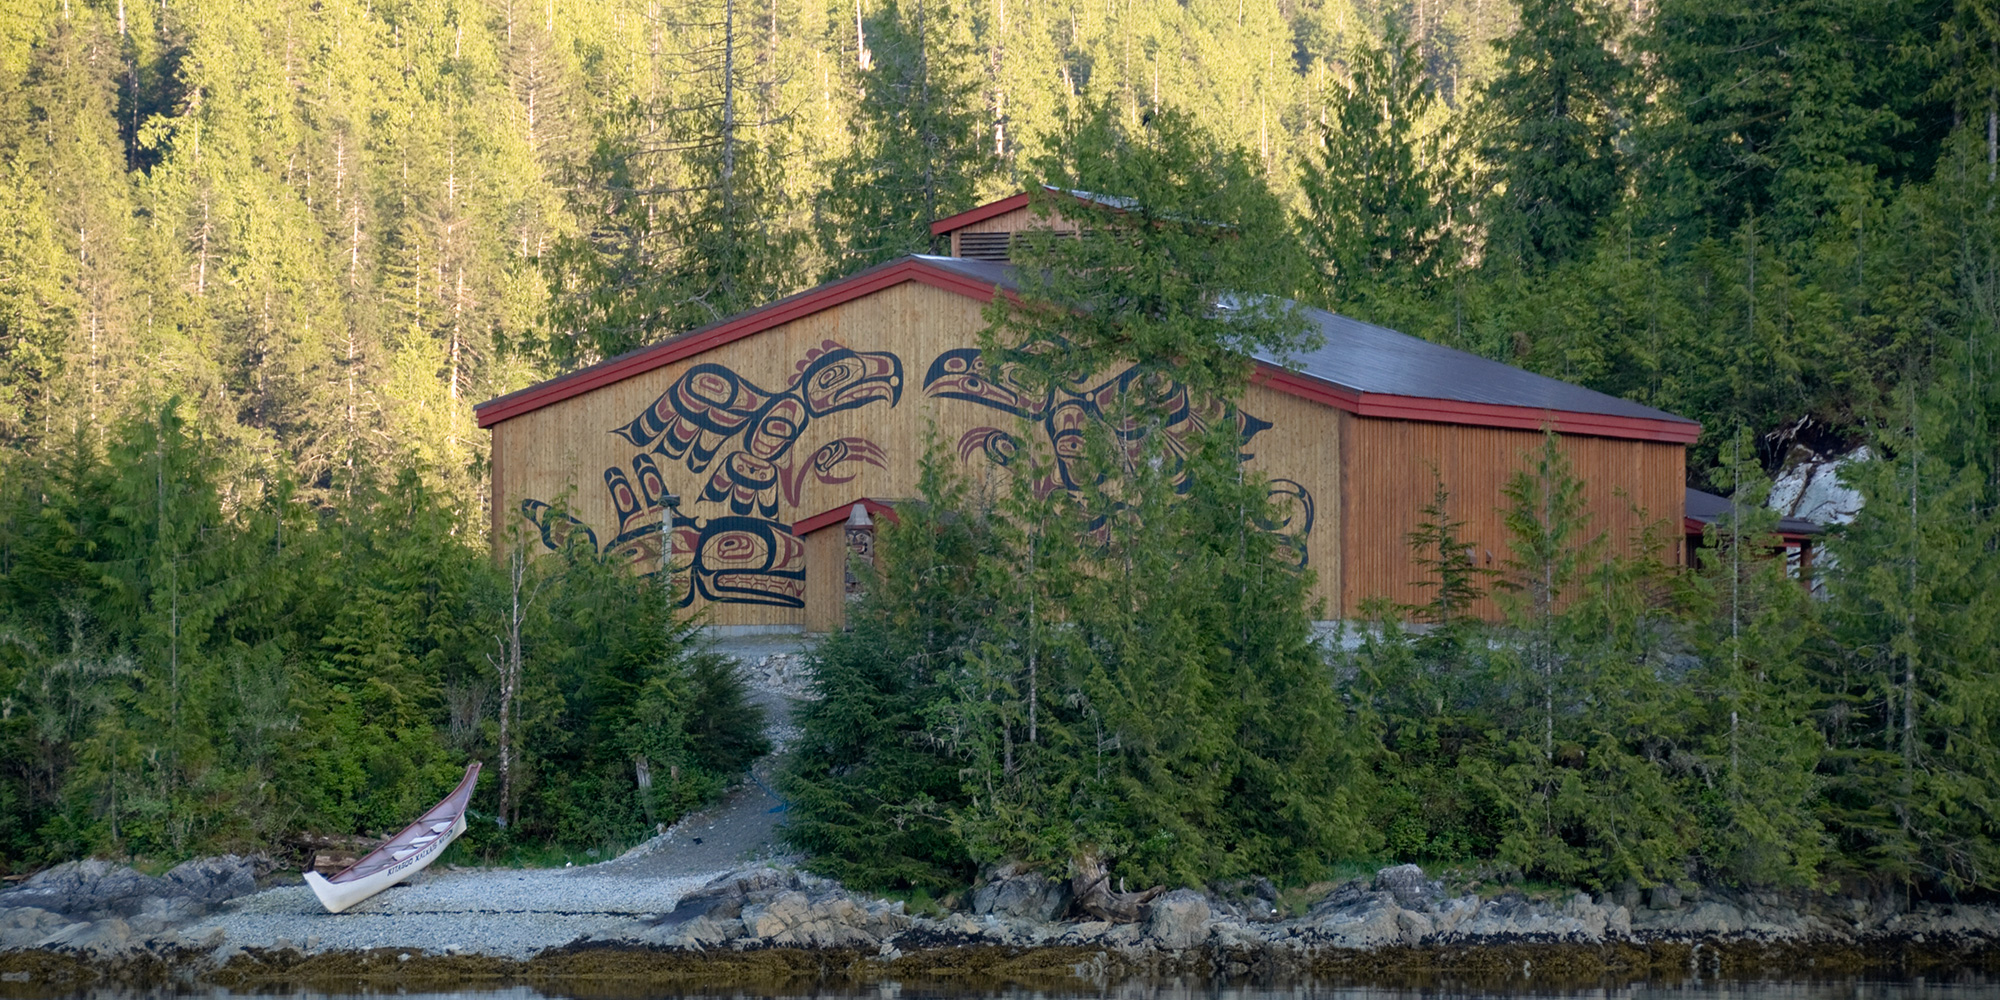 Bighouse and Ceremonial Canoe, Klemtu, BC. Photo: A.Davey, Flickr